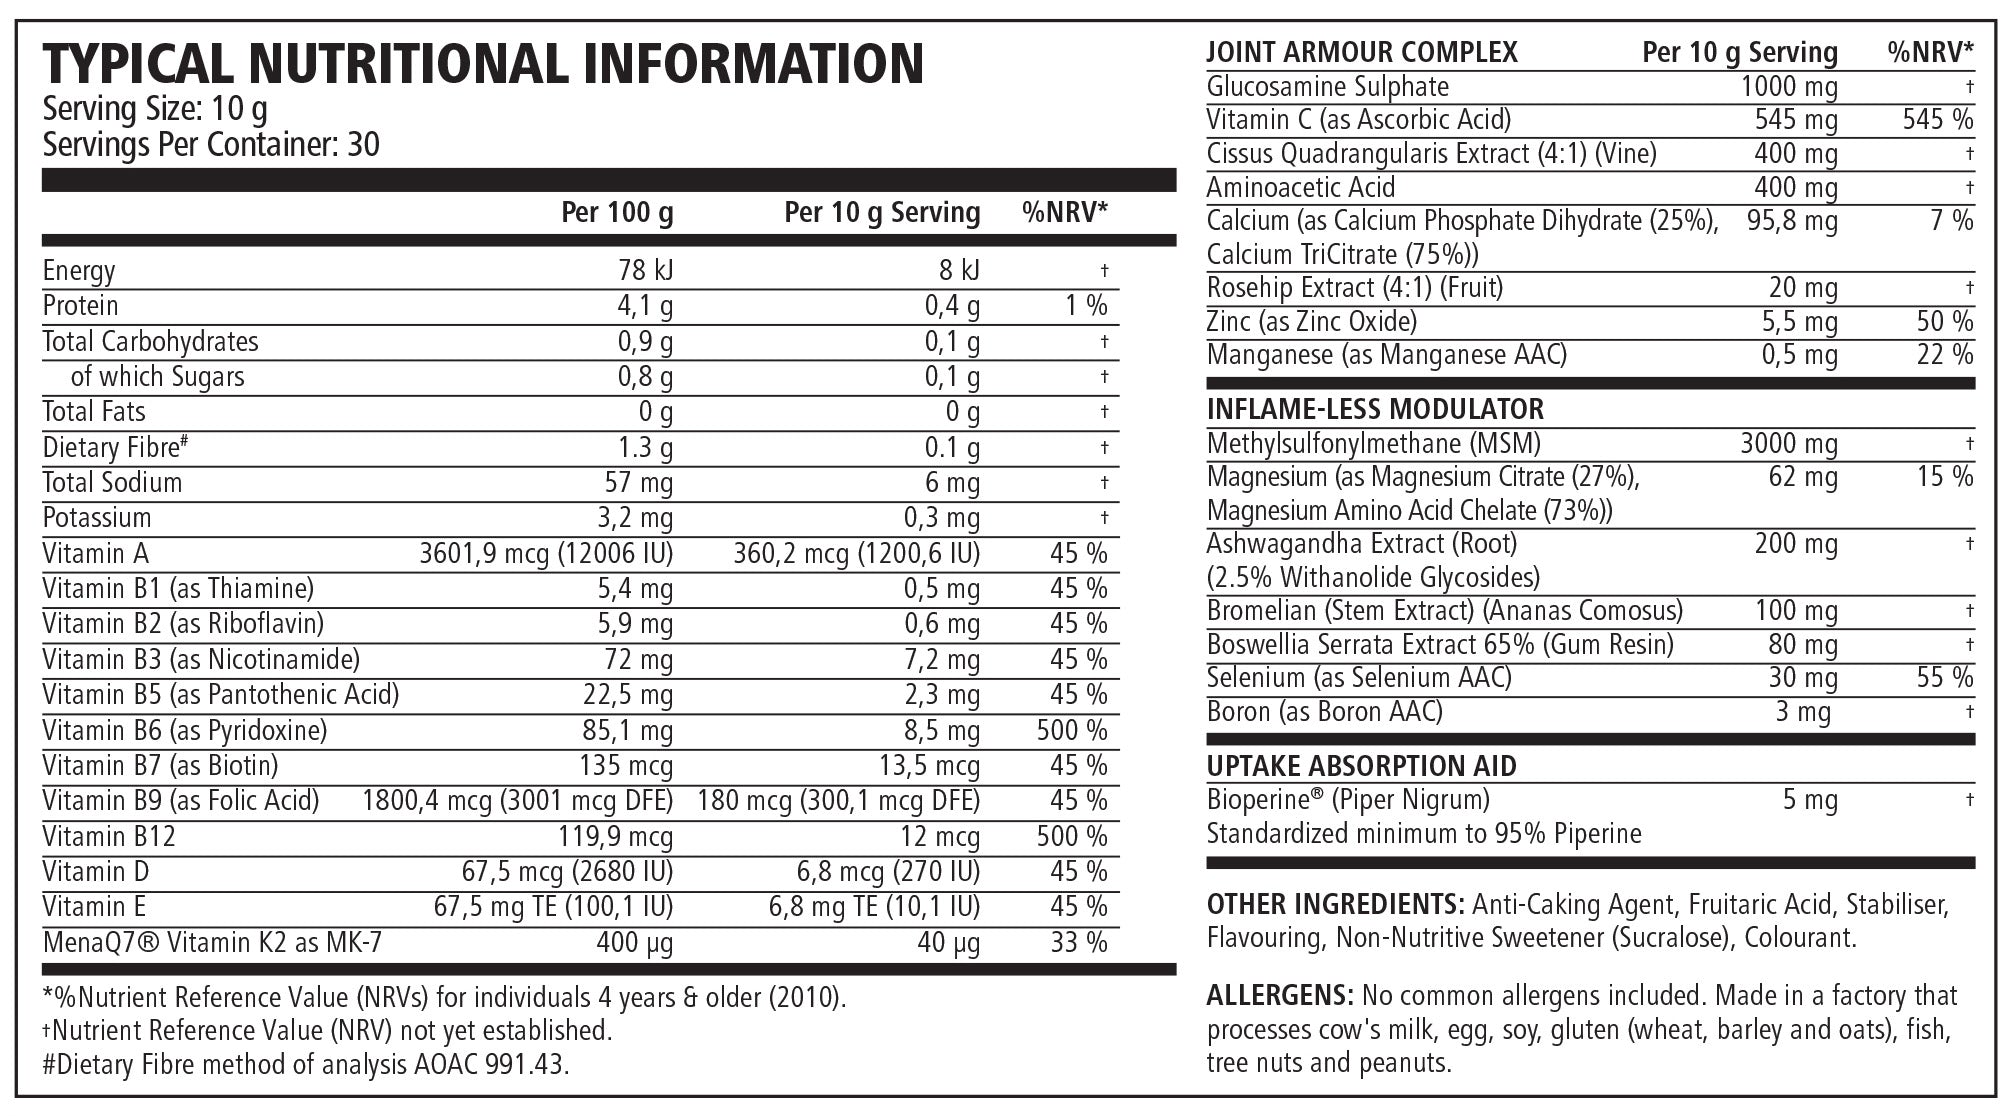 TNT Mercury Hinge Joint Armour V2 300g - Nutritional Information